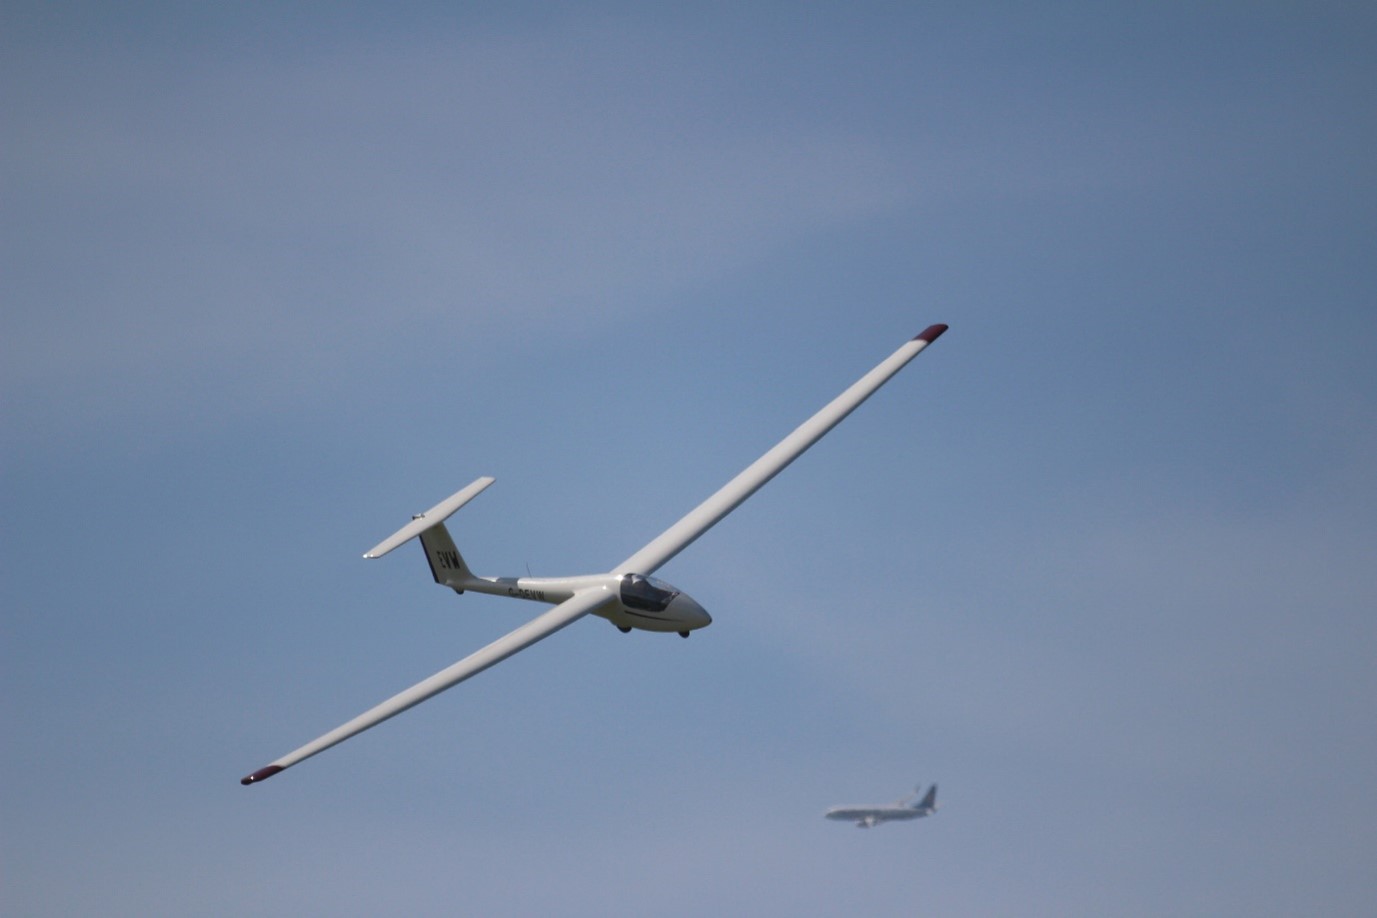 A glider with a commercial aircraft flying in the distance